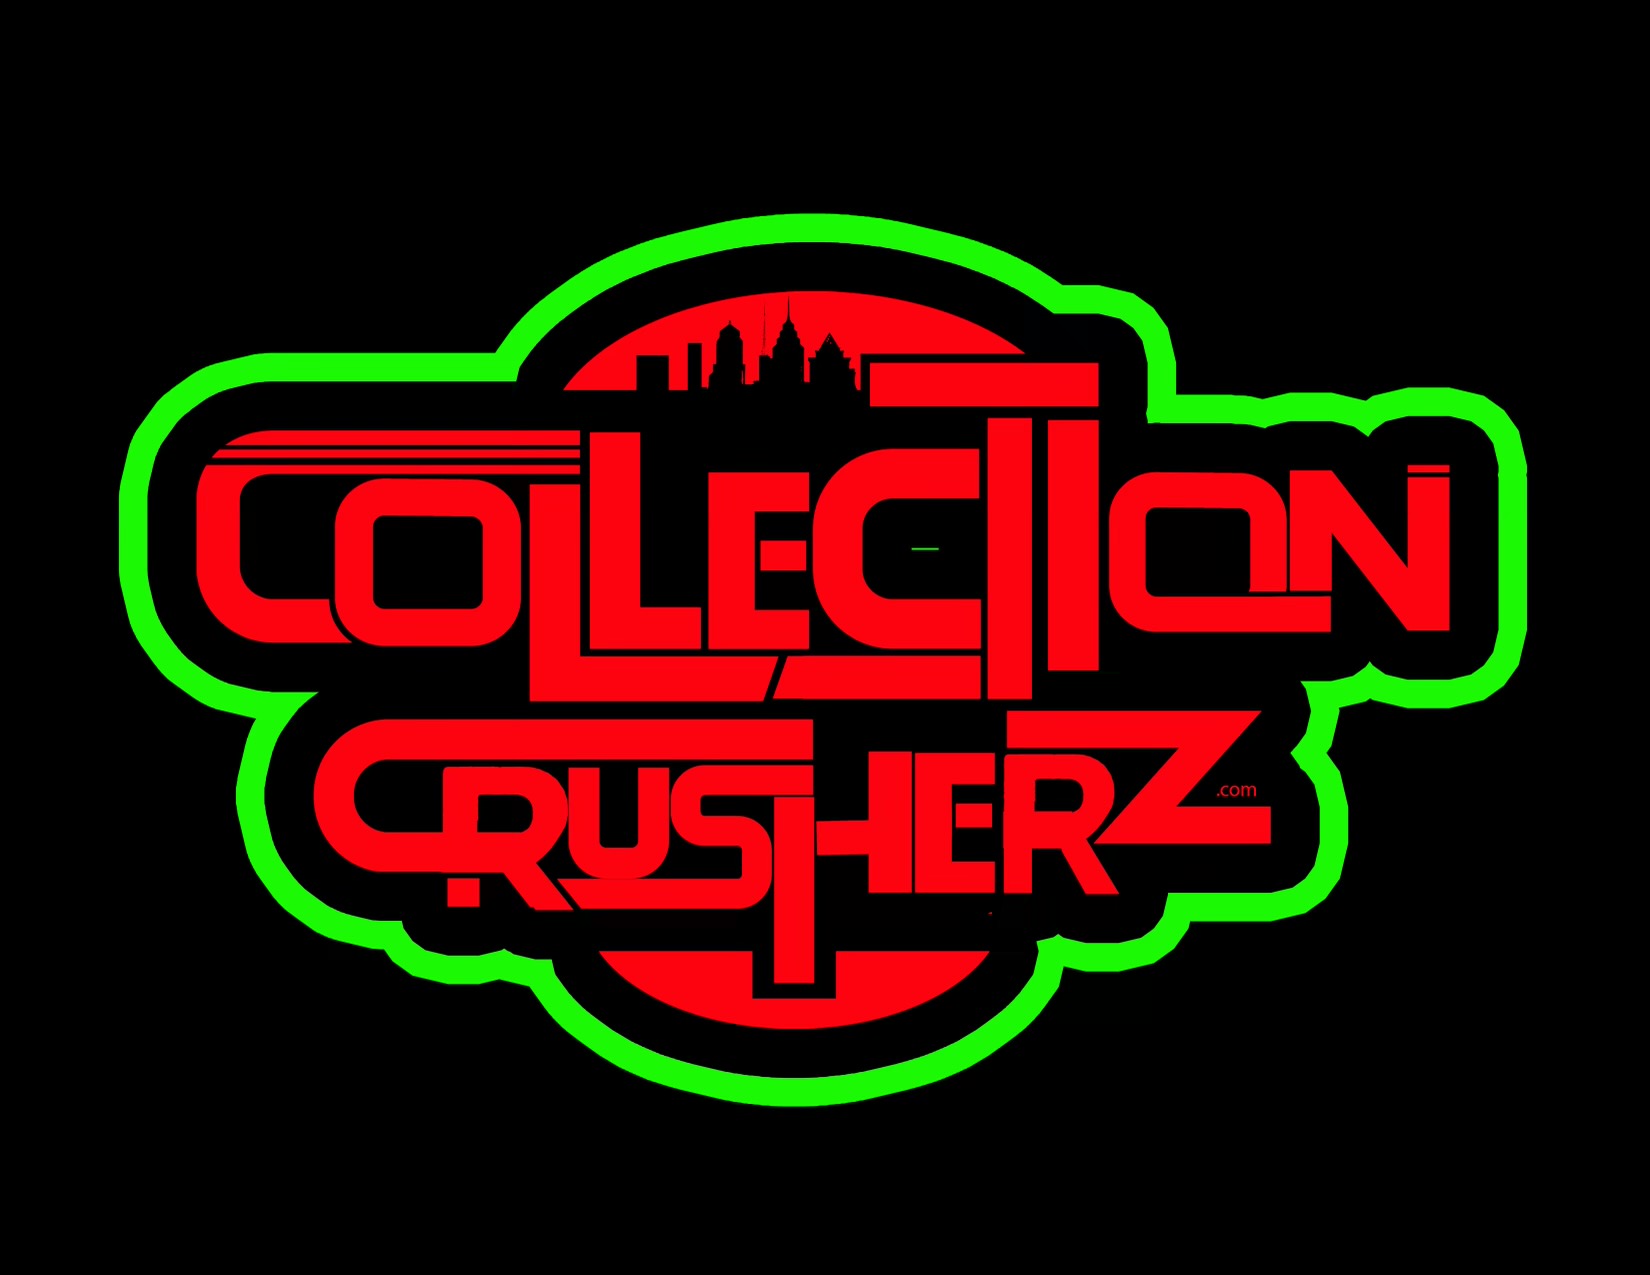 Collection Crusherz